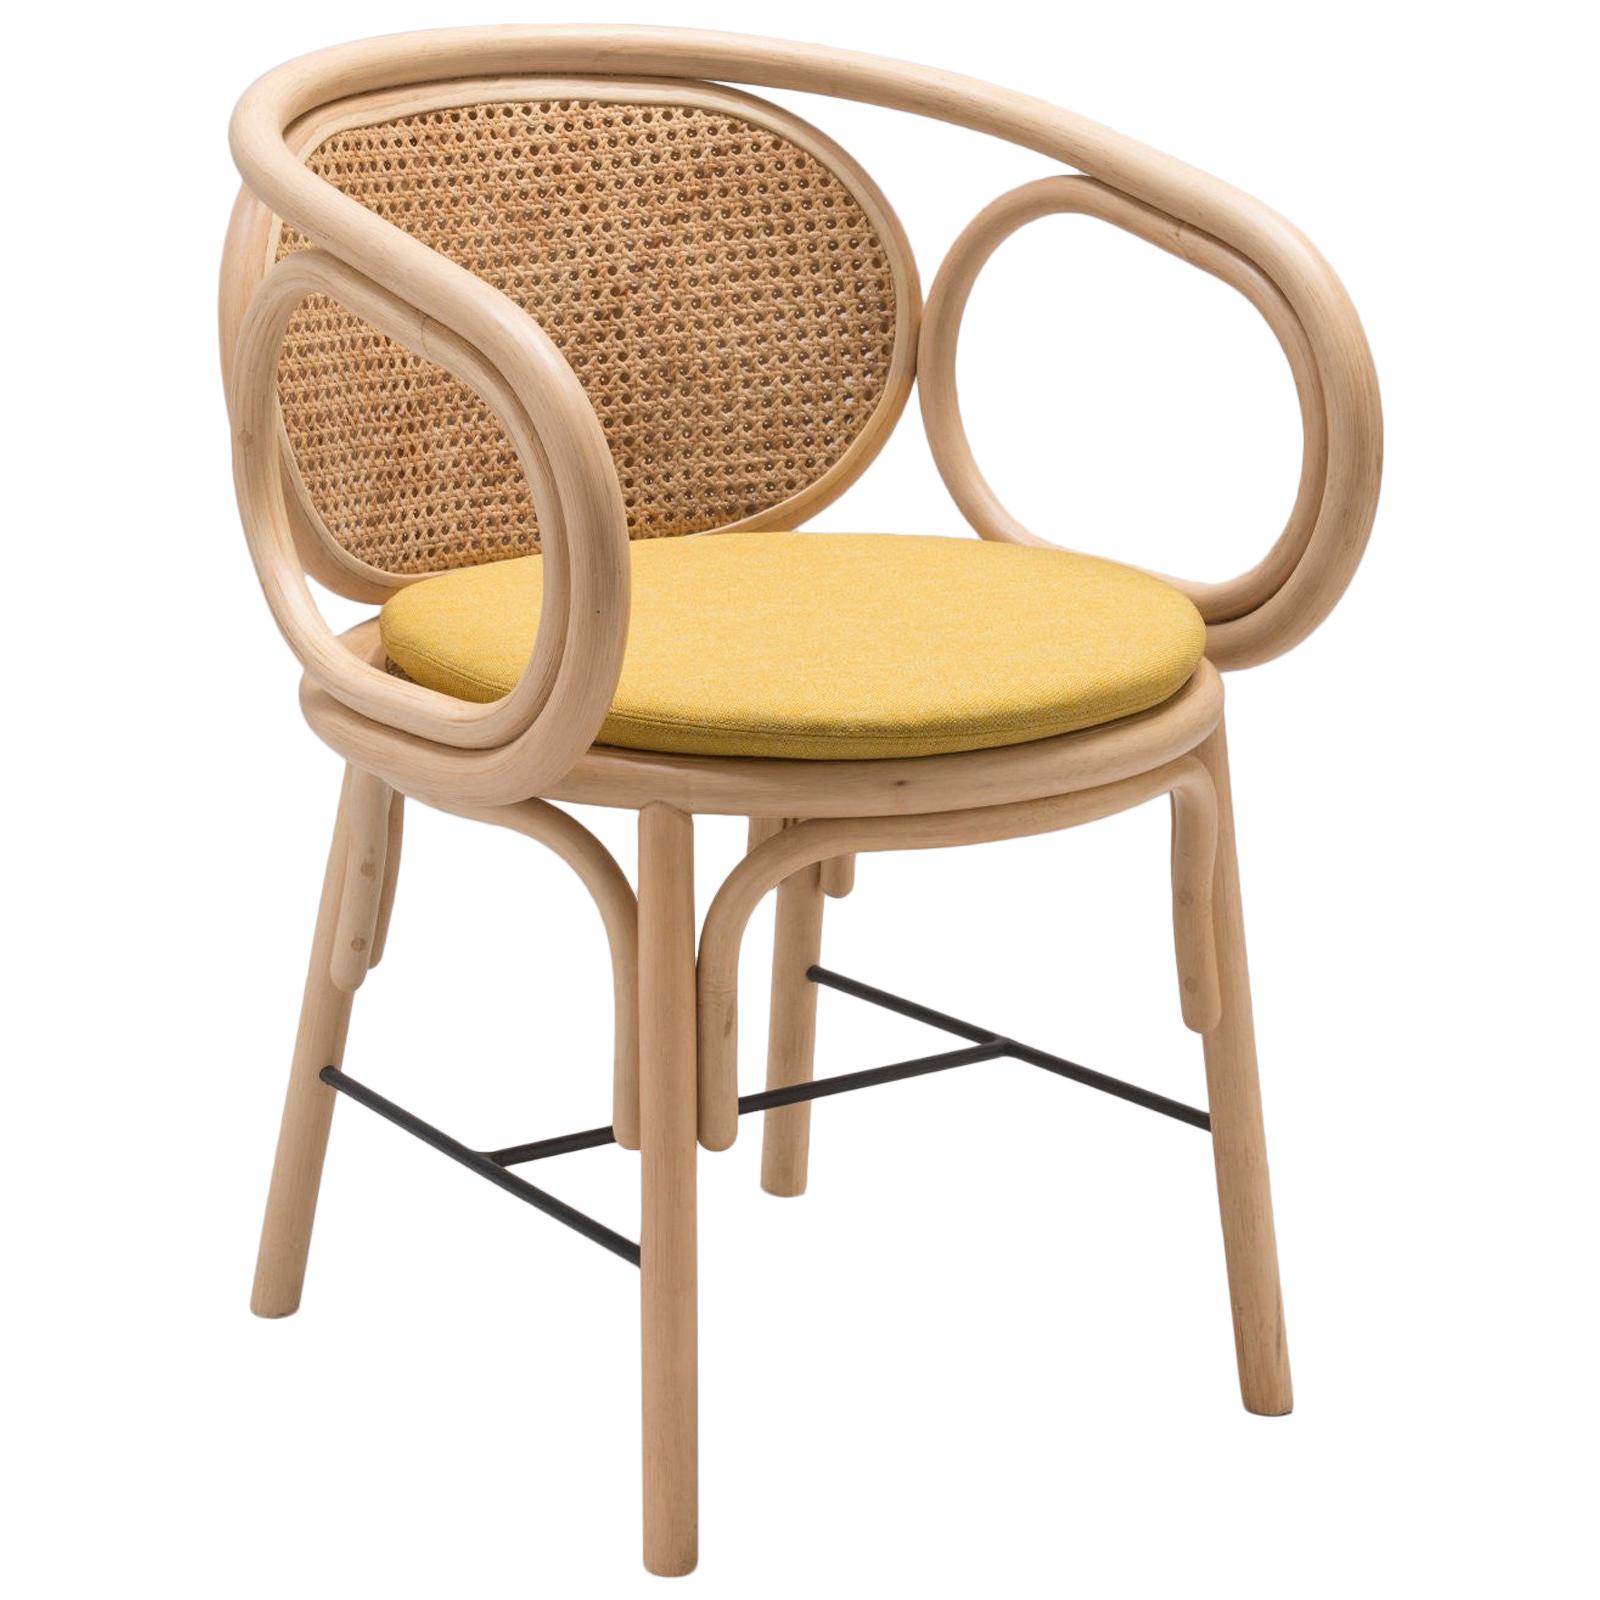 Rattan and Woven Cane Armchair French Modern Design